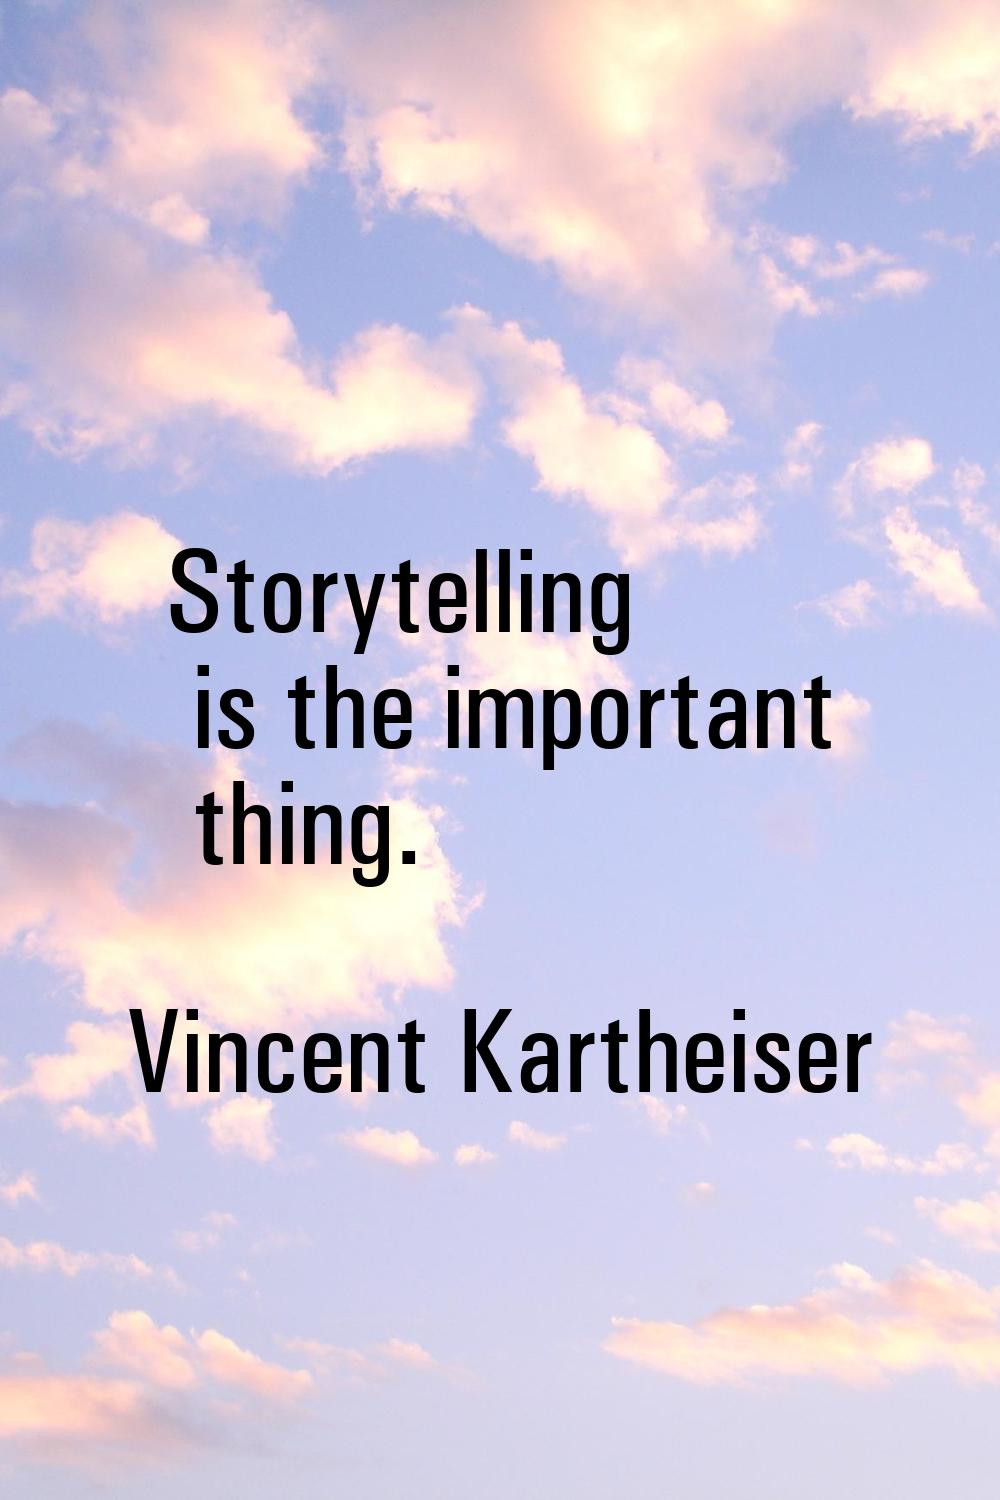 Storytelling is the important thing.